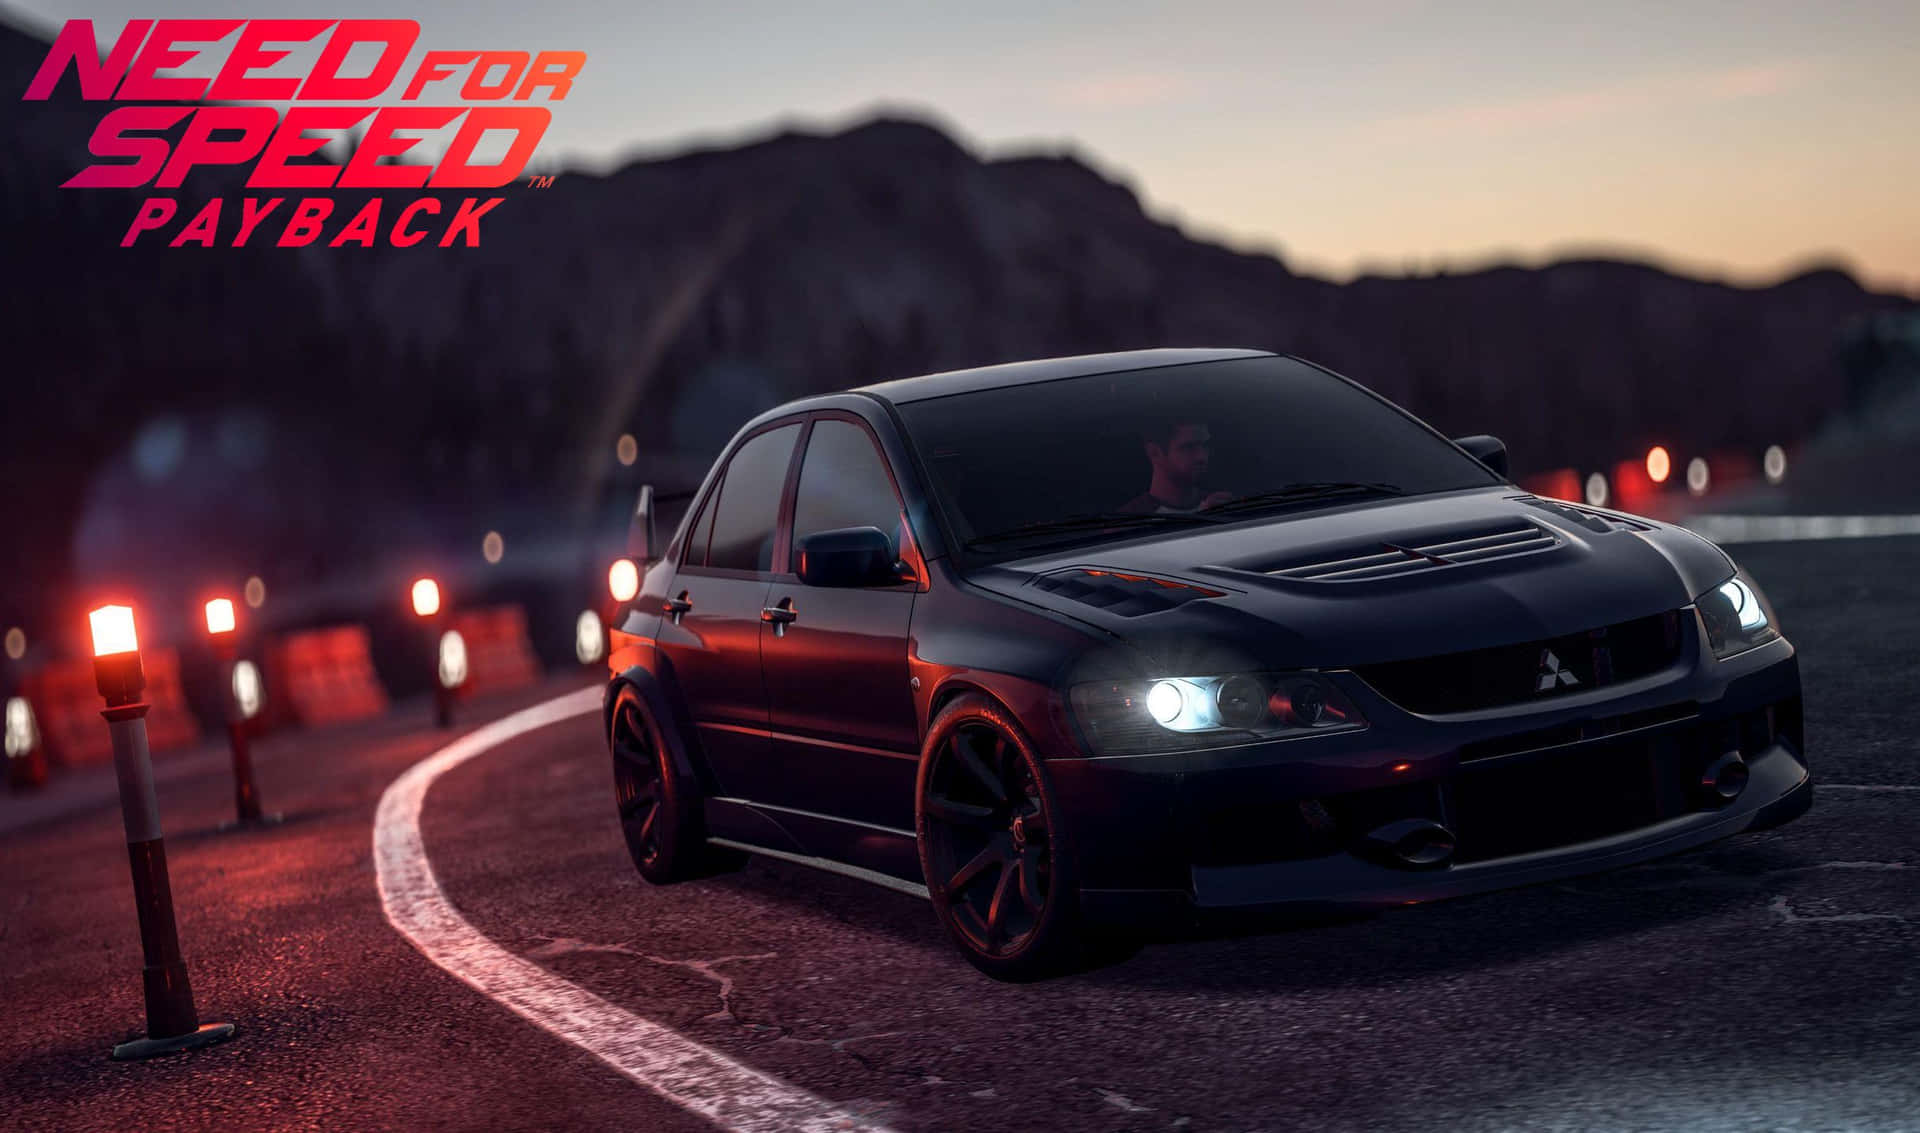 2440x1440 Need For Speed Payback Background Wallpaper